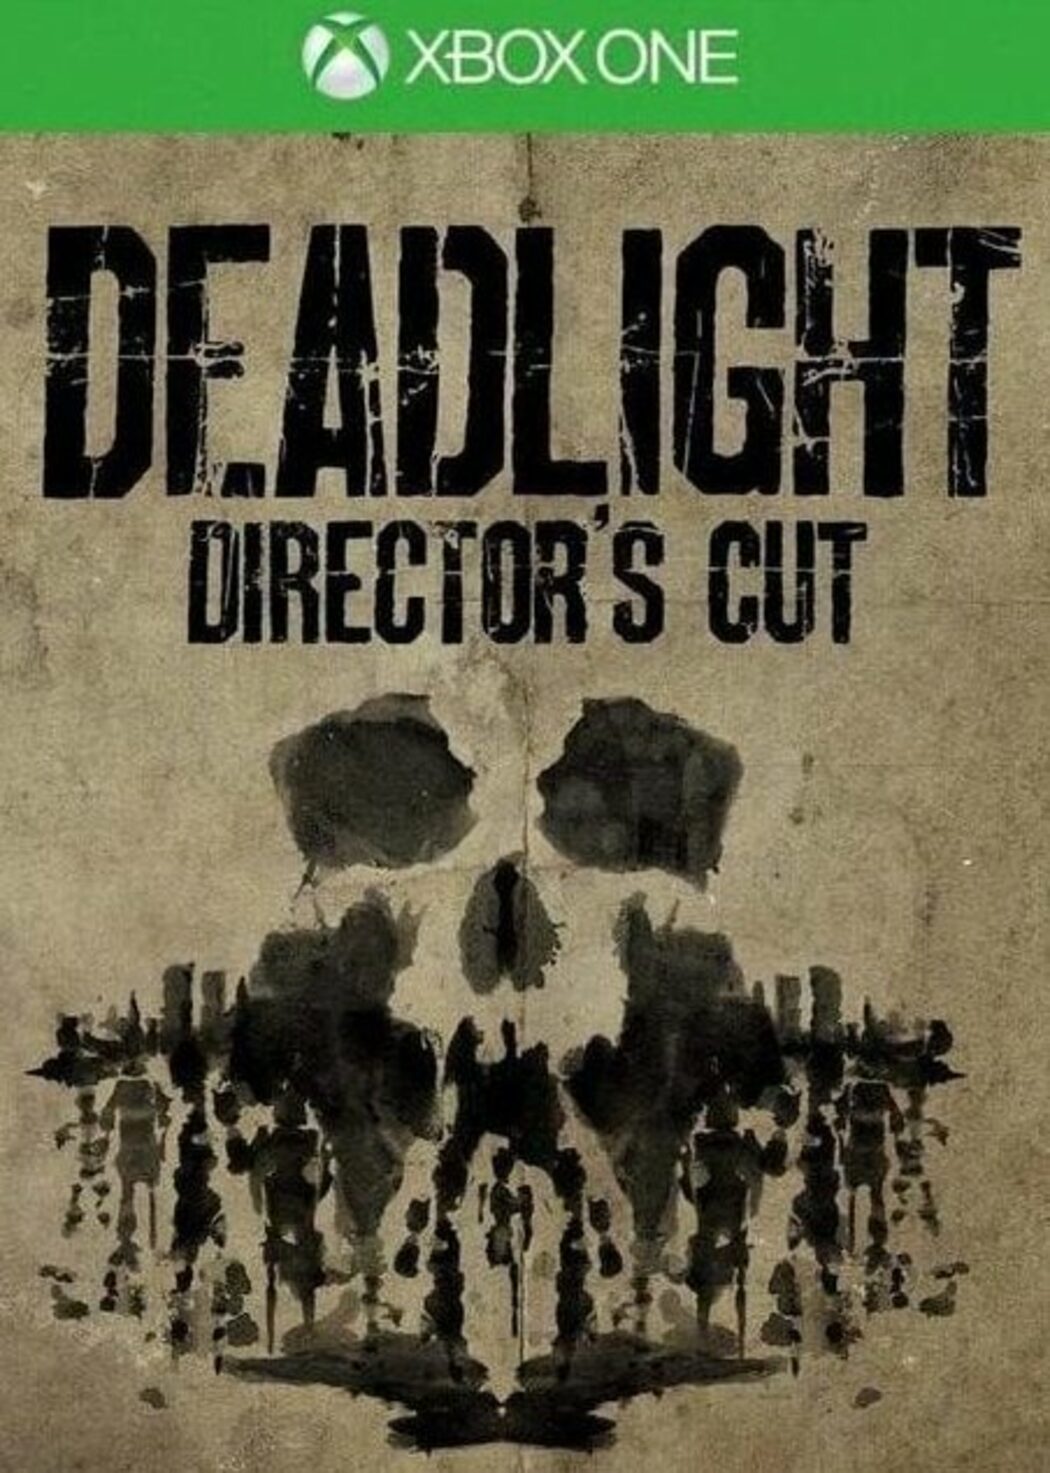 Xbox One - Deadlight's Director's Cut - Used